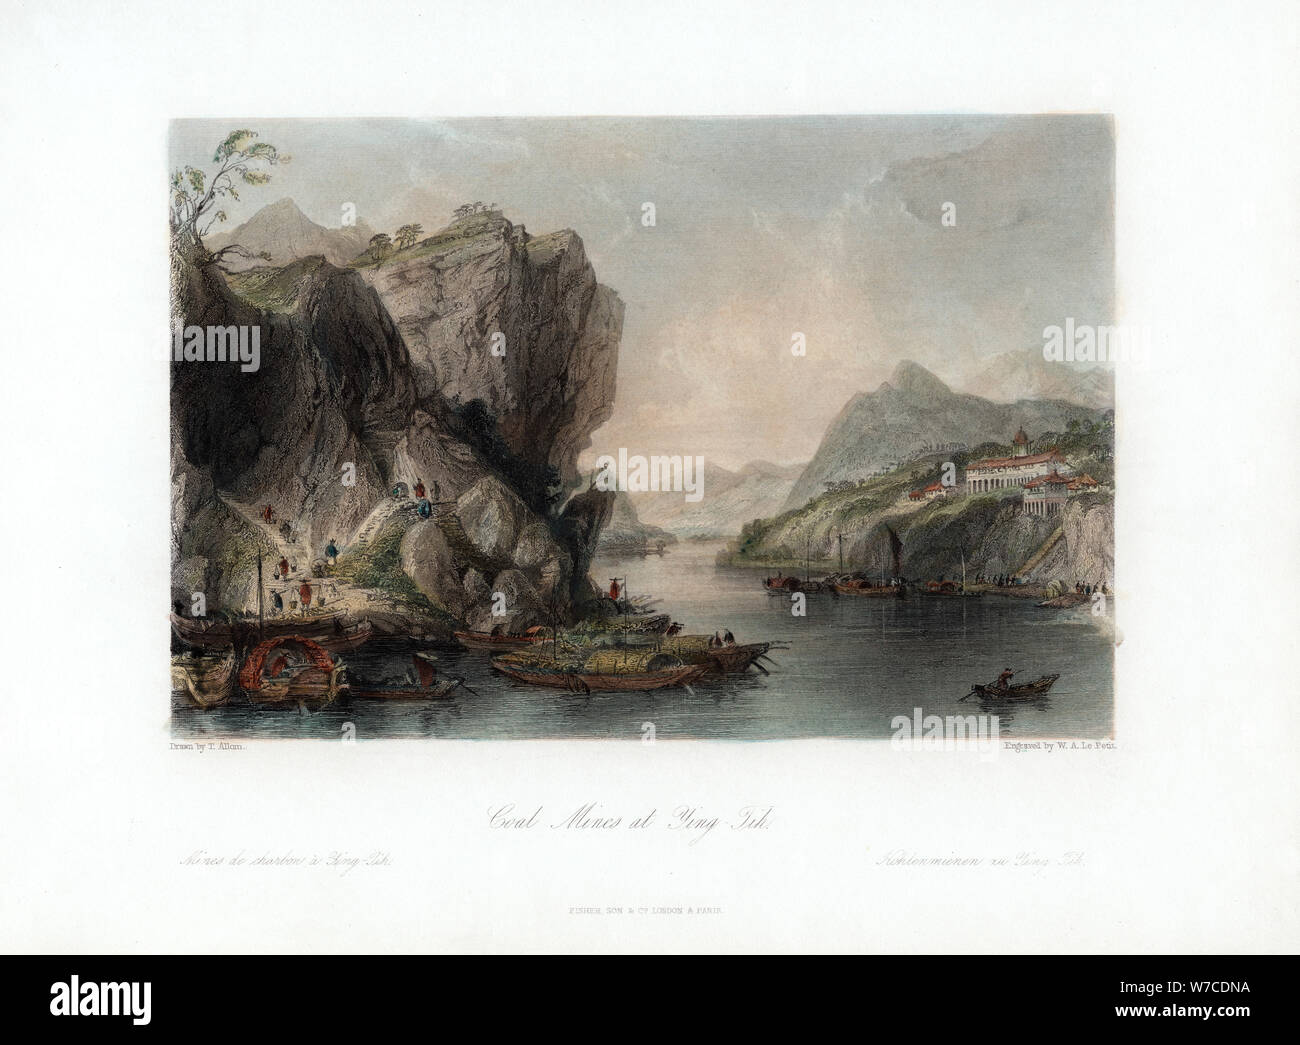 'Coal Mines at Ying-Tih', China, c1840.Artist: W A Le Petit Stock Photo